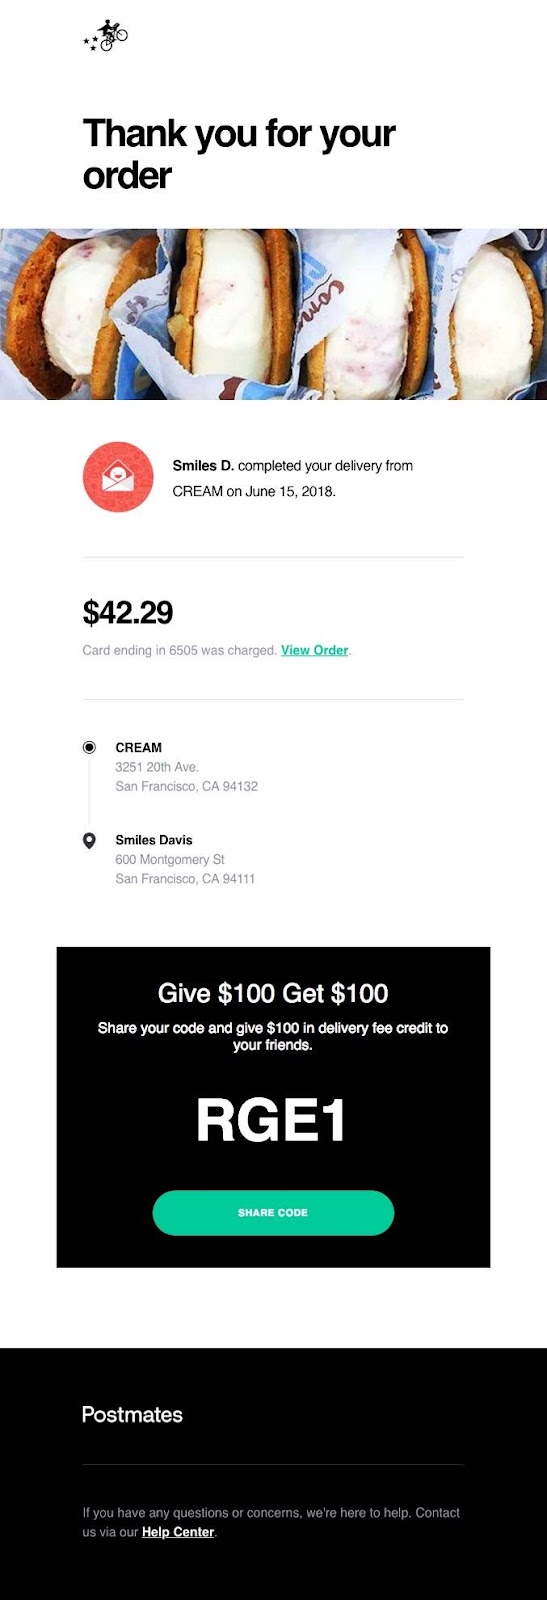 Postmates thank you email example